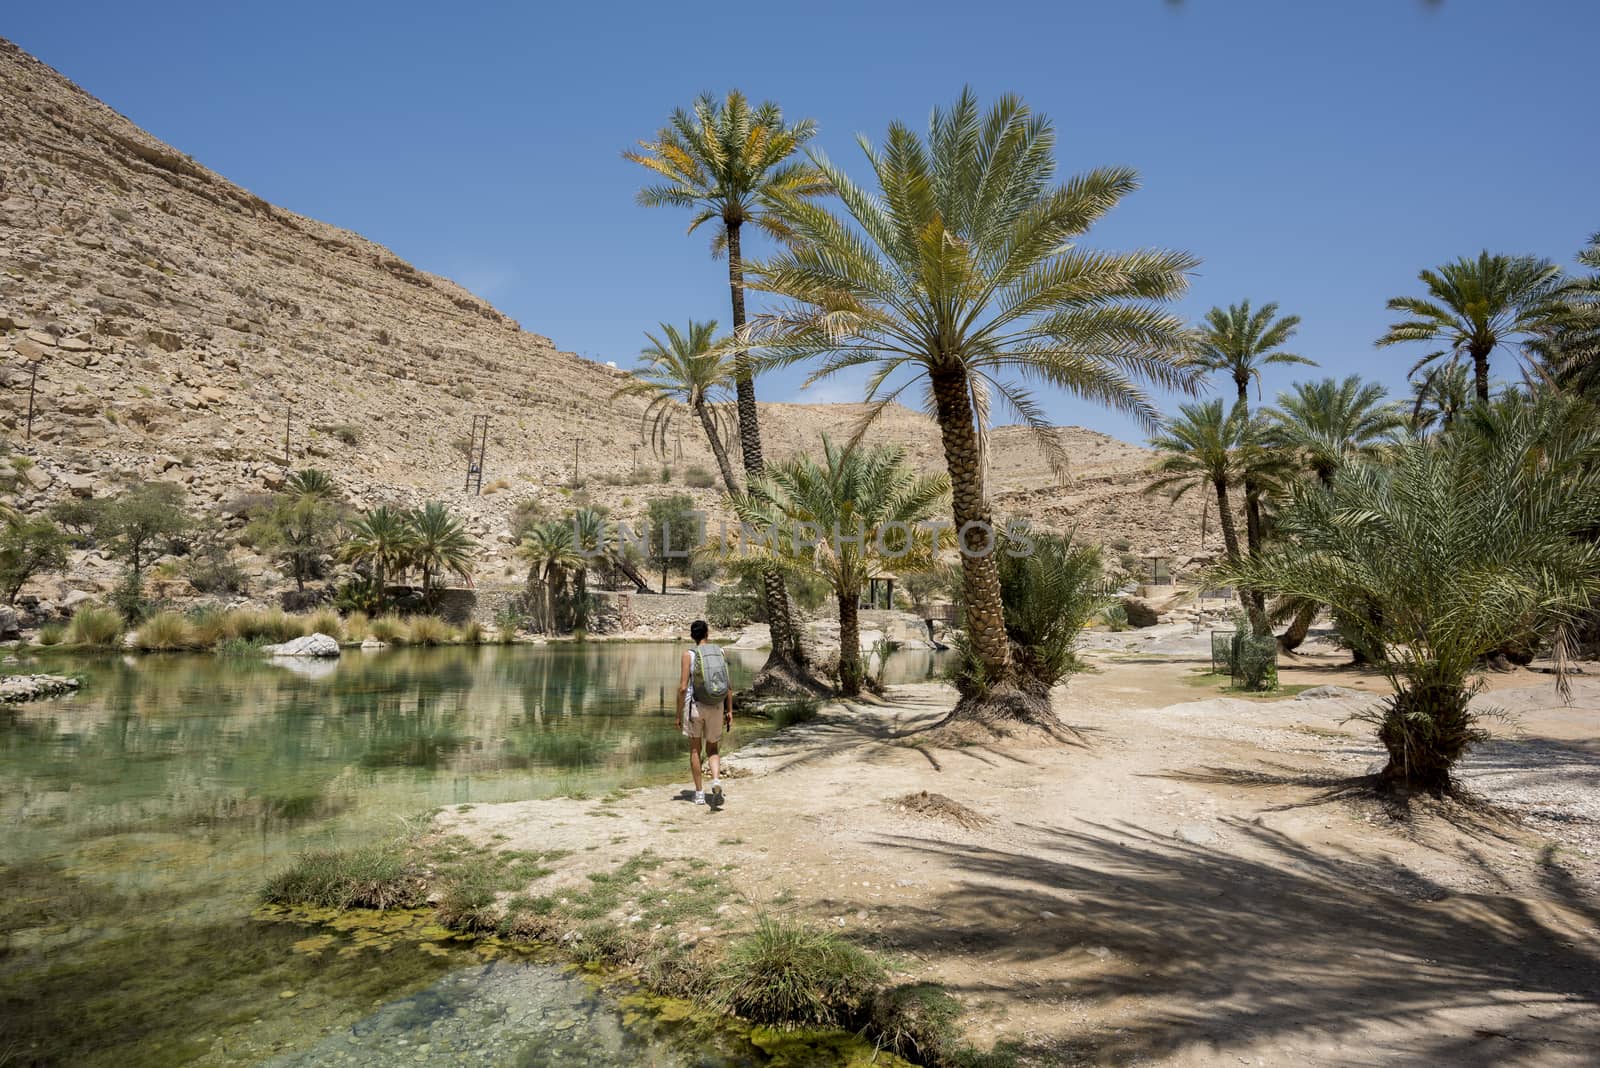 Woman (tourist) walking near the main pool  of the famous Wadi Bani Khalid in the Sultanate of Oman